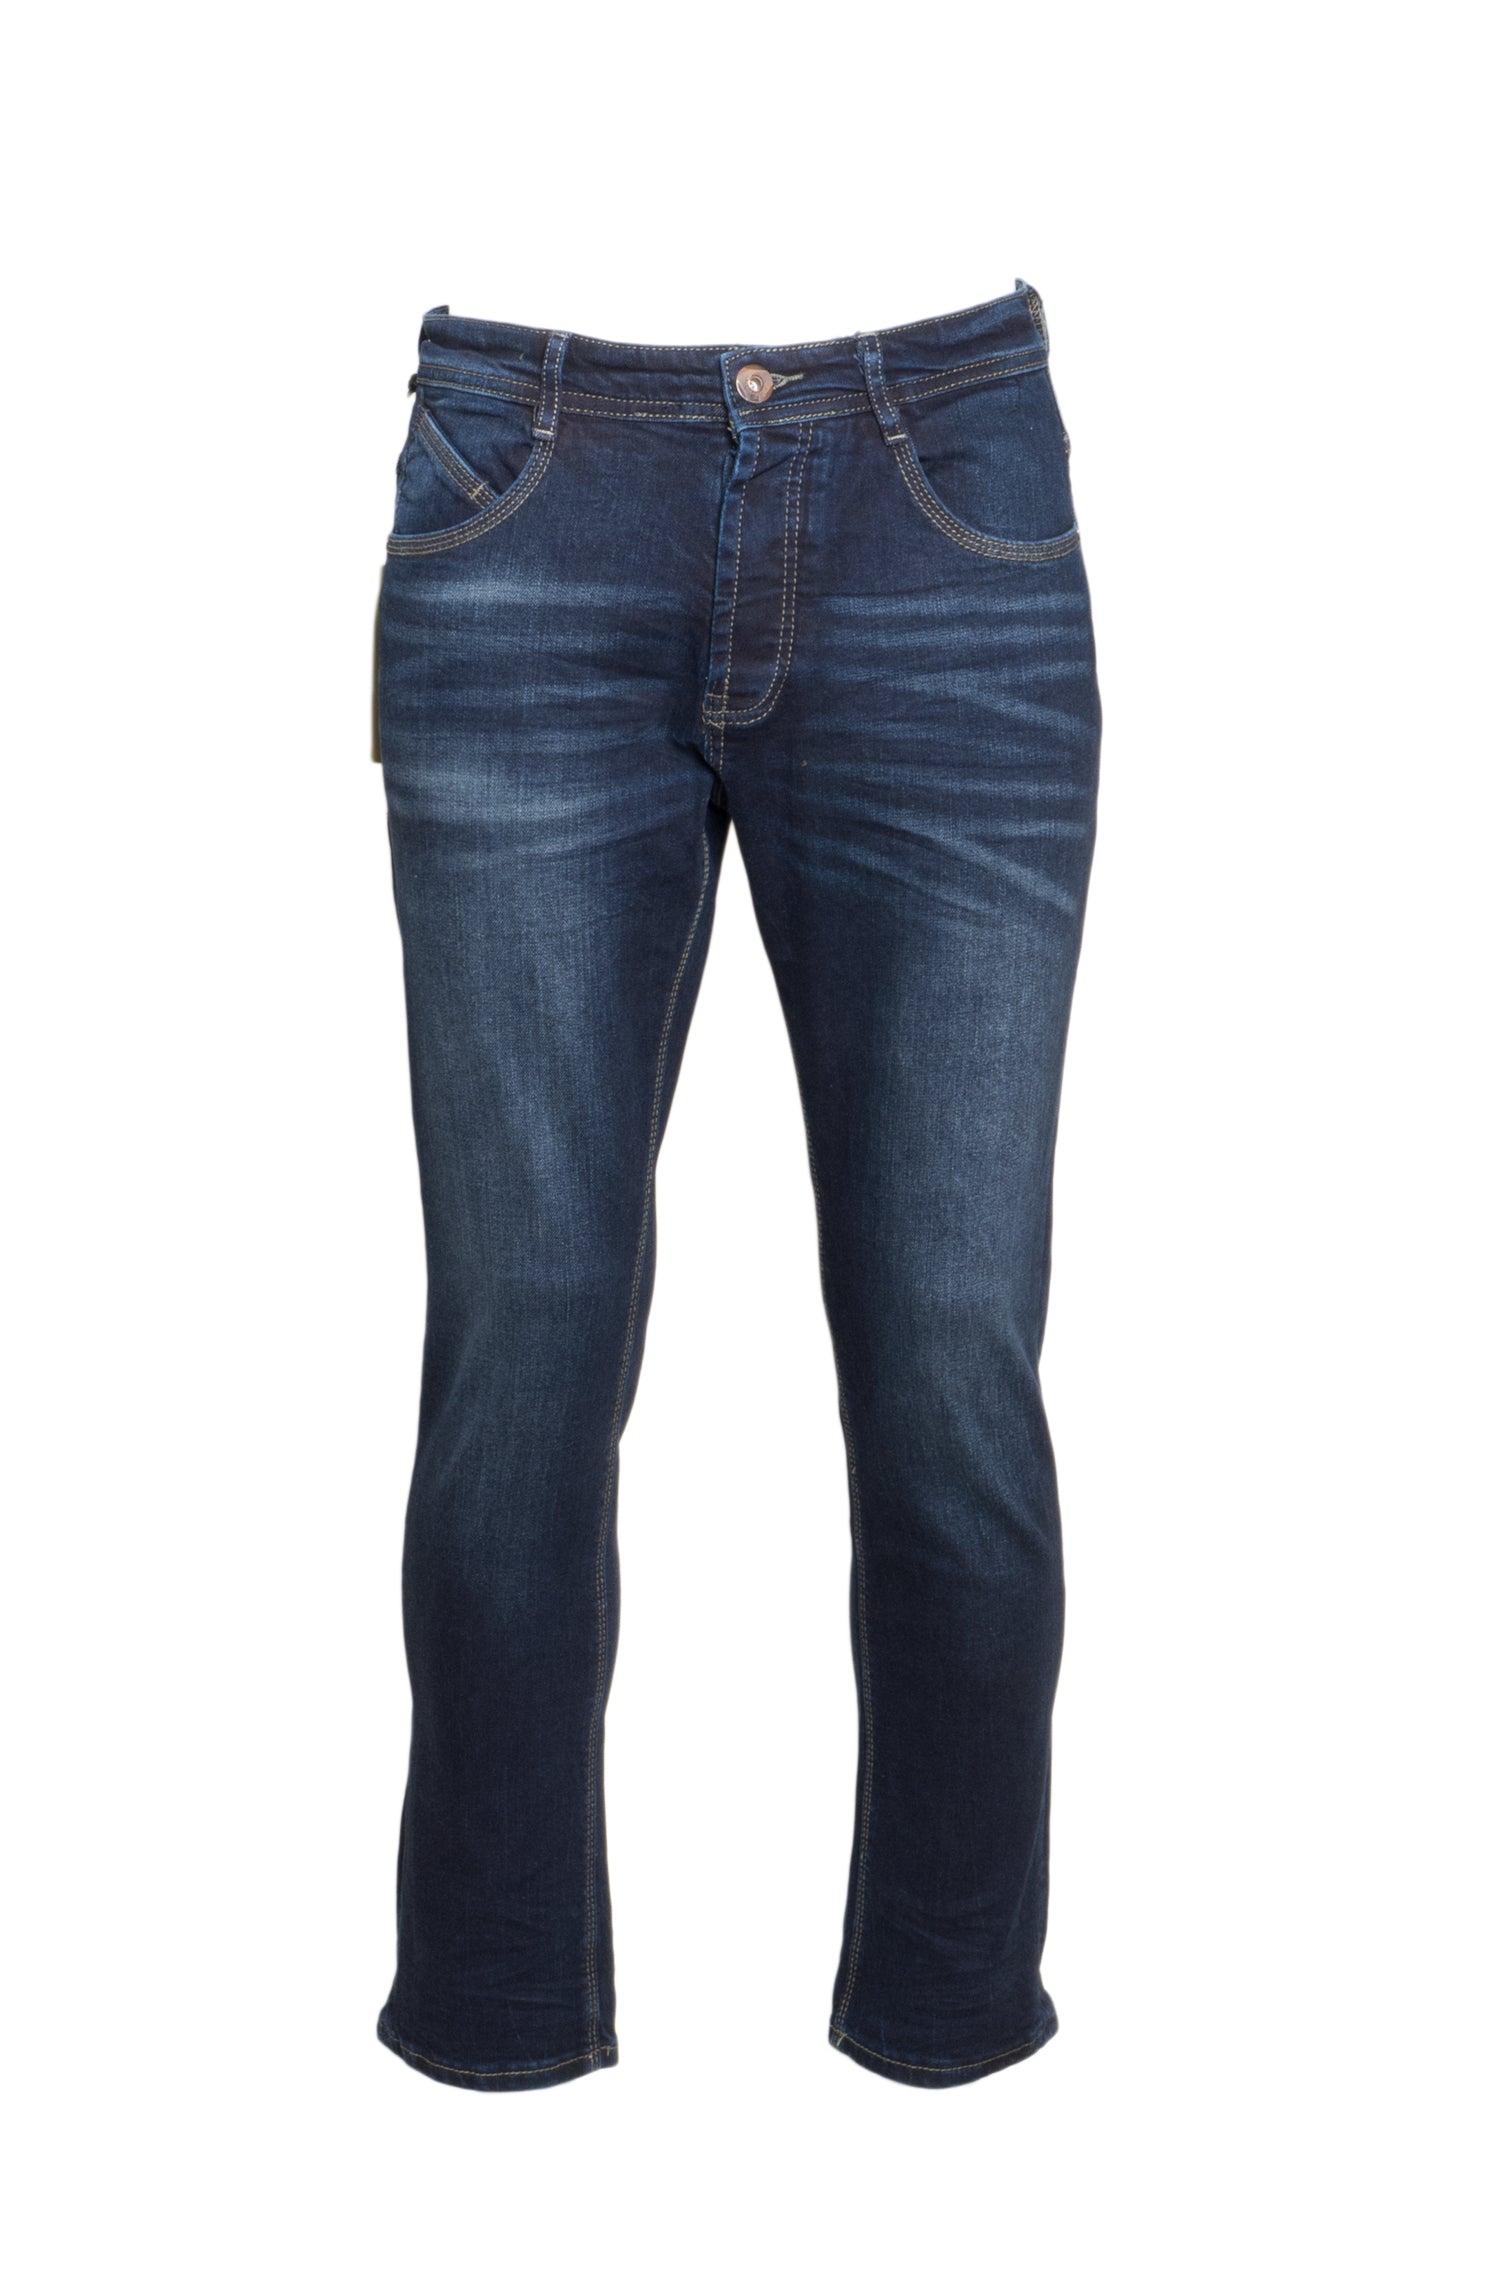 Mens Em538 DSW Tapered Fit Jean By Eto Jeans - Spirit Clothing